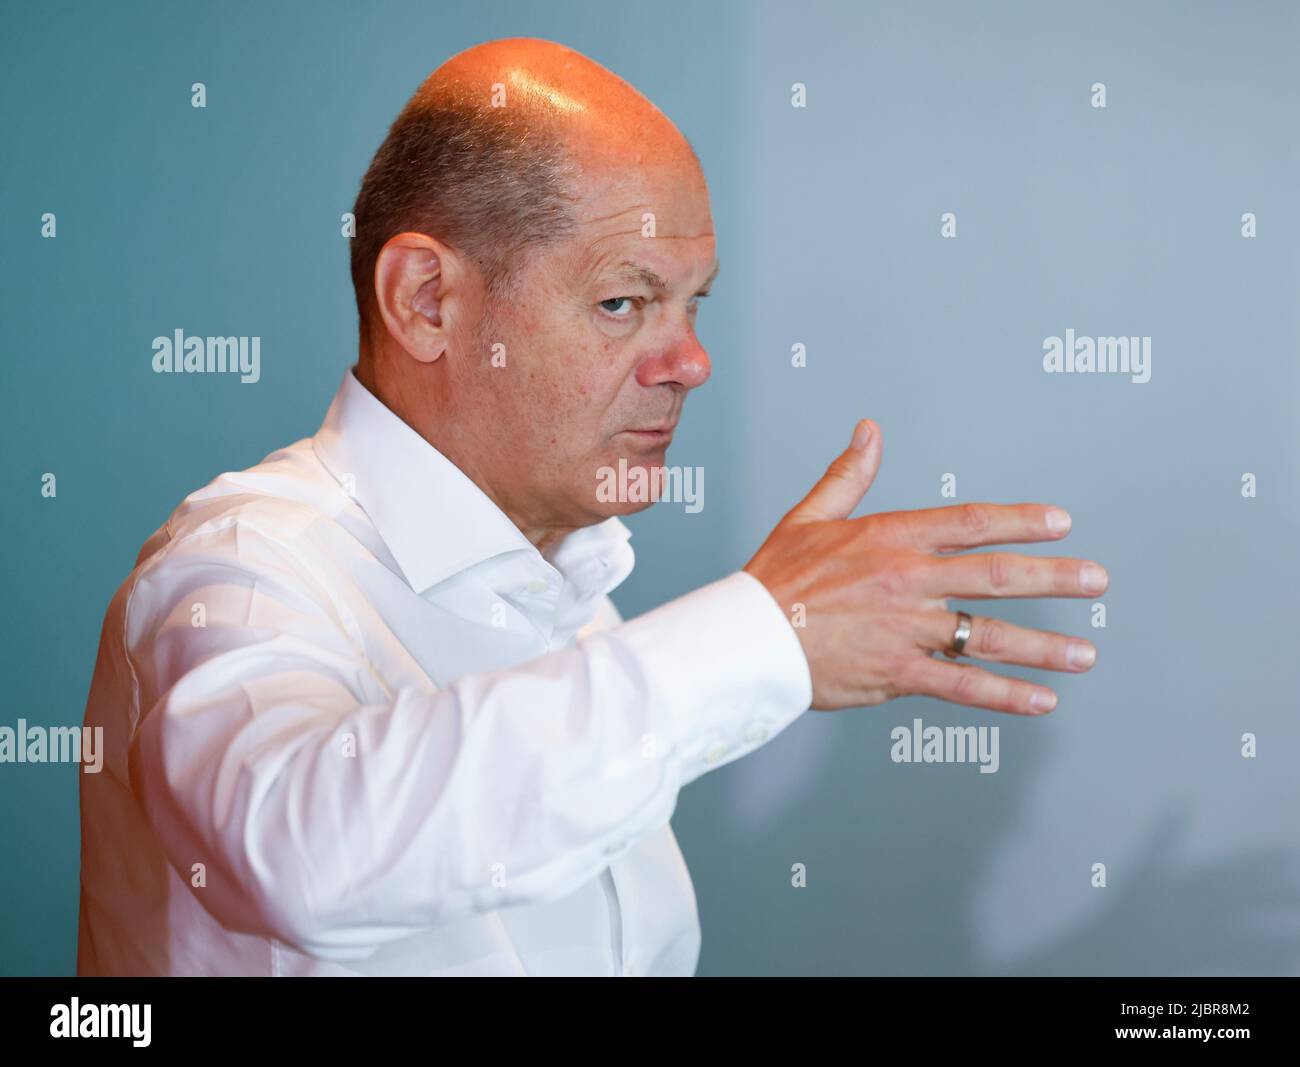 German Chancellor Olaf Scholz arrives for the weekly German cabinet meeting at the Federal Chancellery in Berlin, Germany June 8, 2022. REUTERS/Hannibal Hanschke Stock Photo